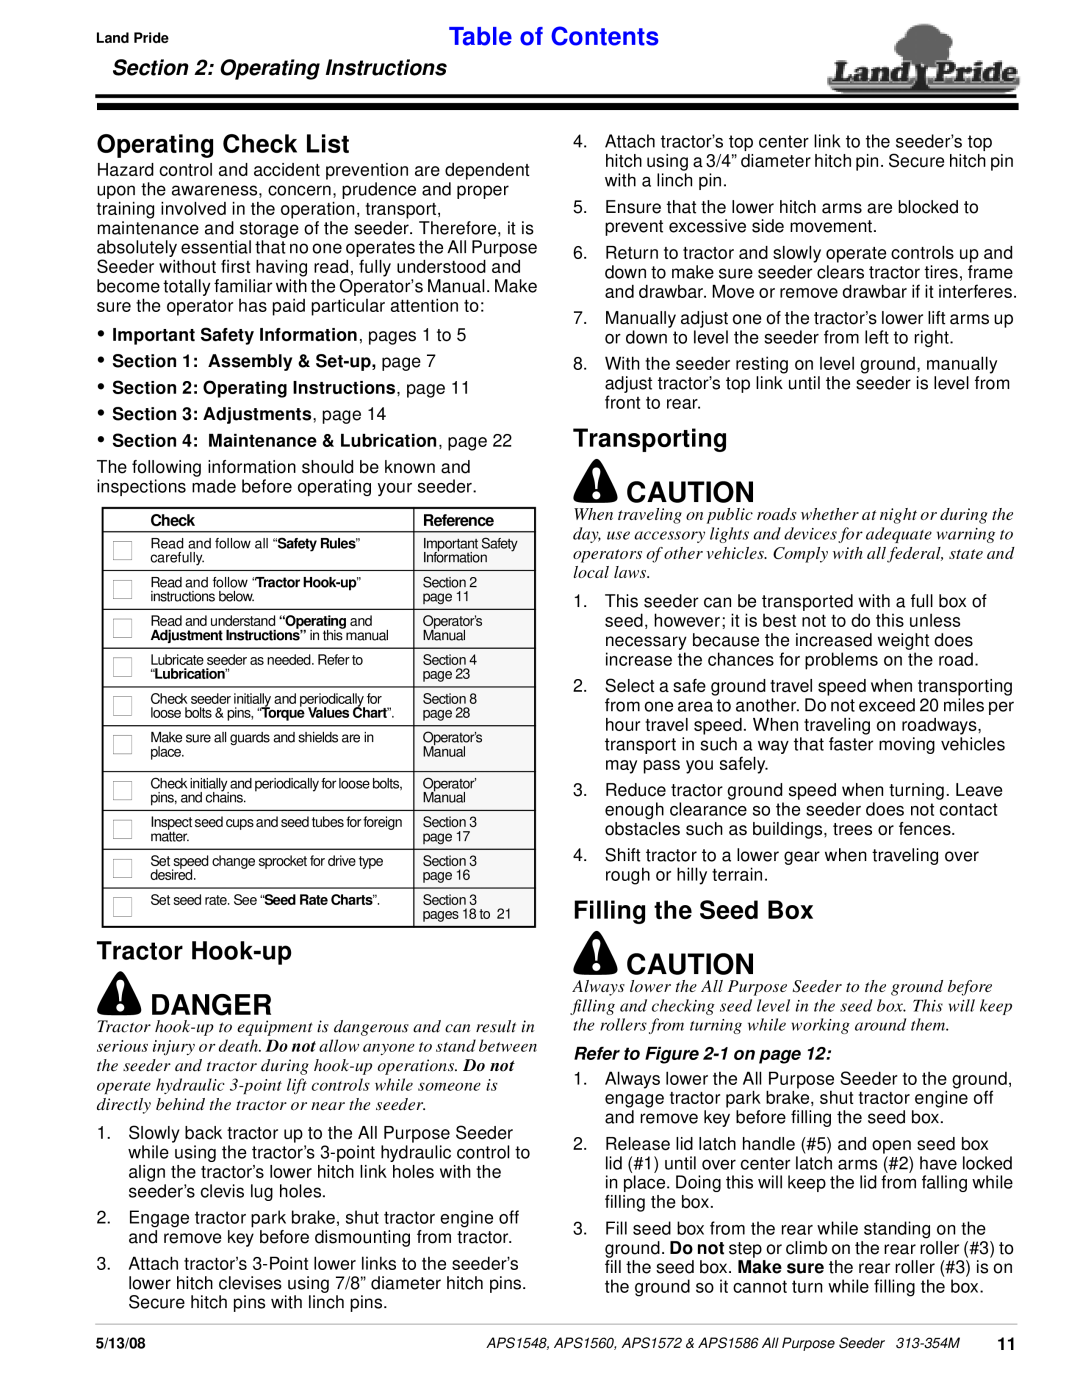 Land Pride APS1572 Danger, Operating Check List, Transporting, Tractor Hook-up, Filling the Seed Box, Adjustments, page 